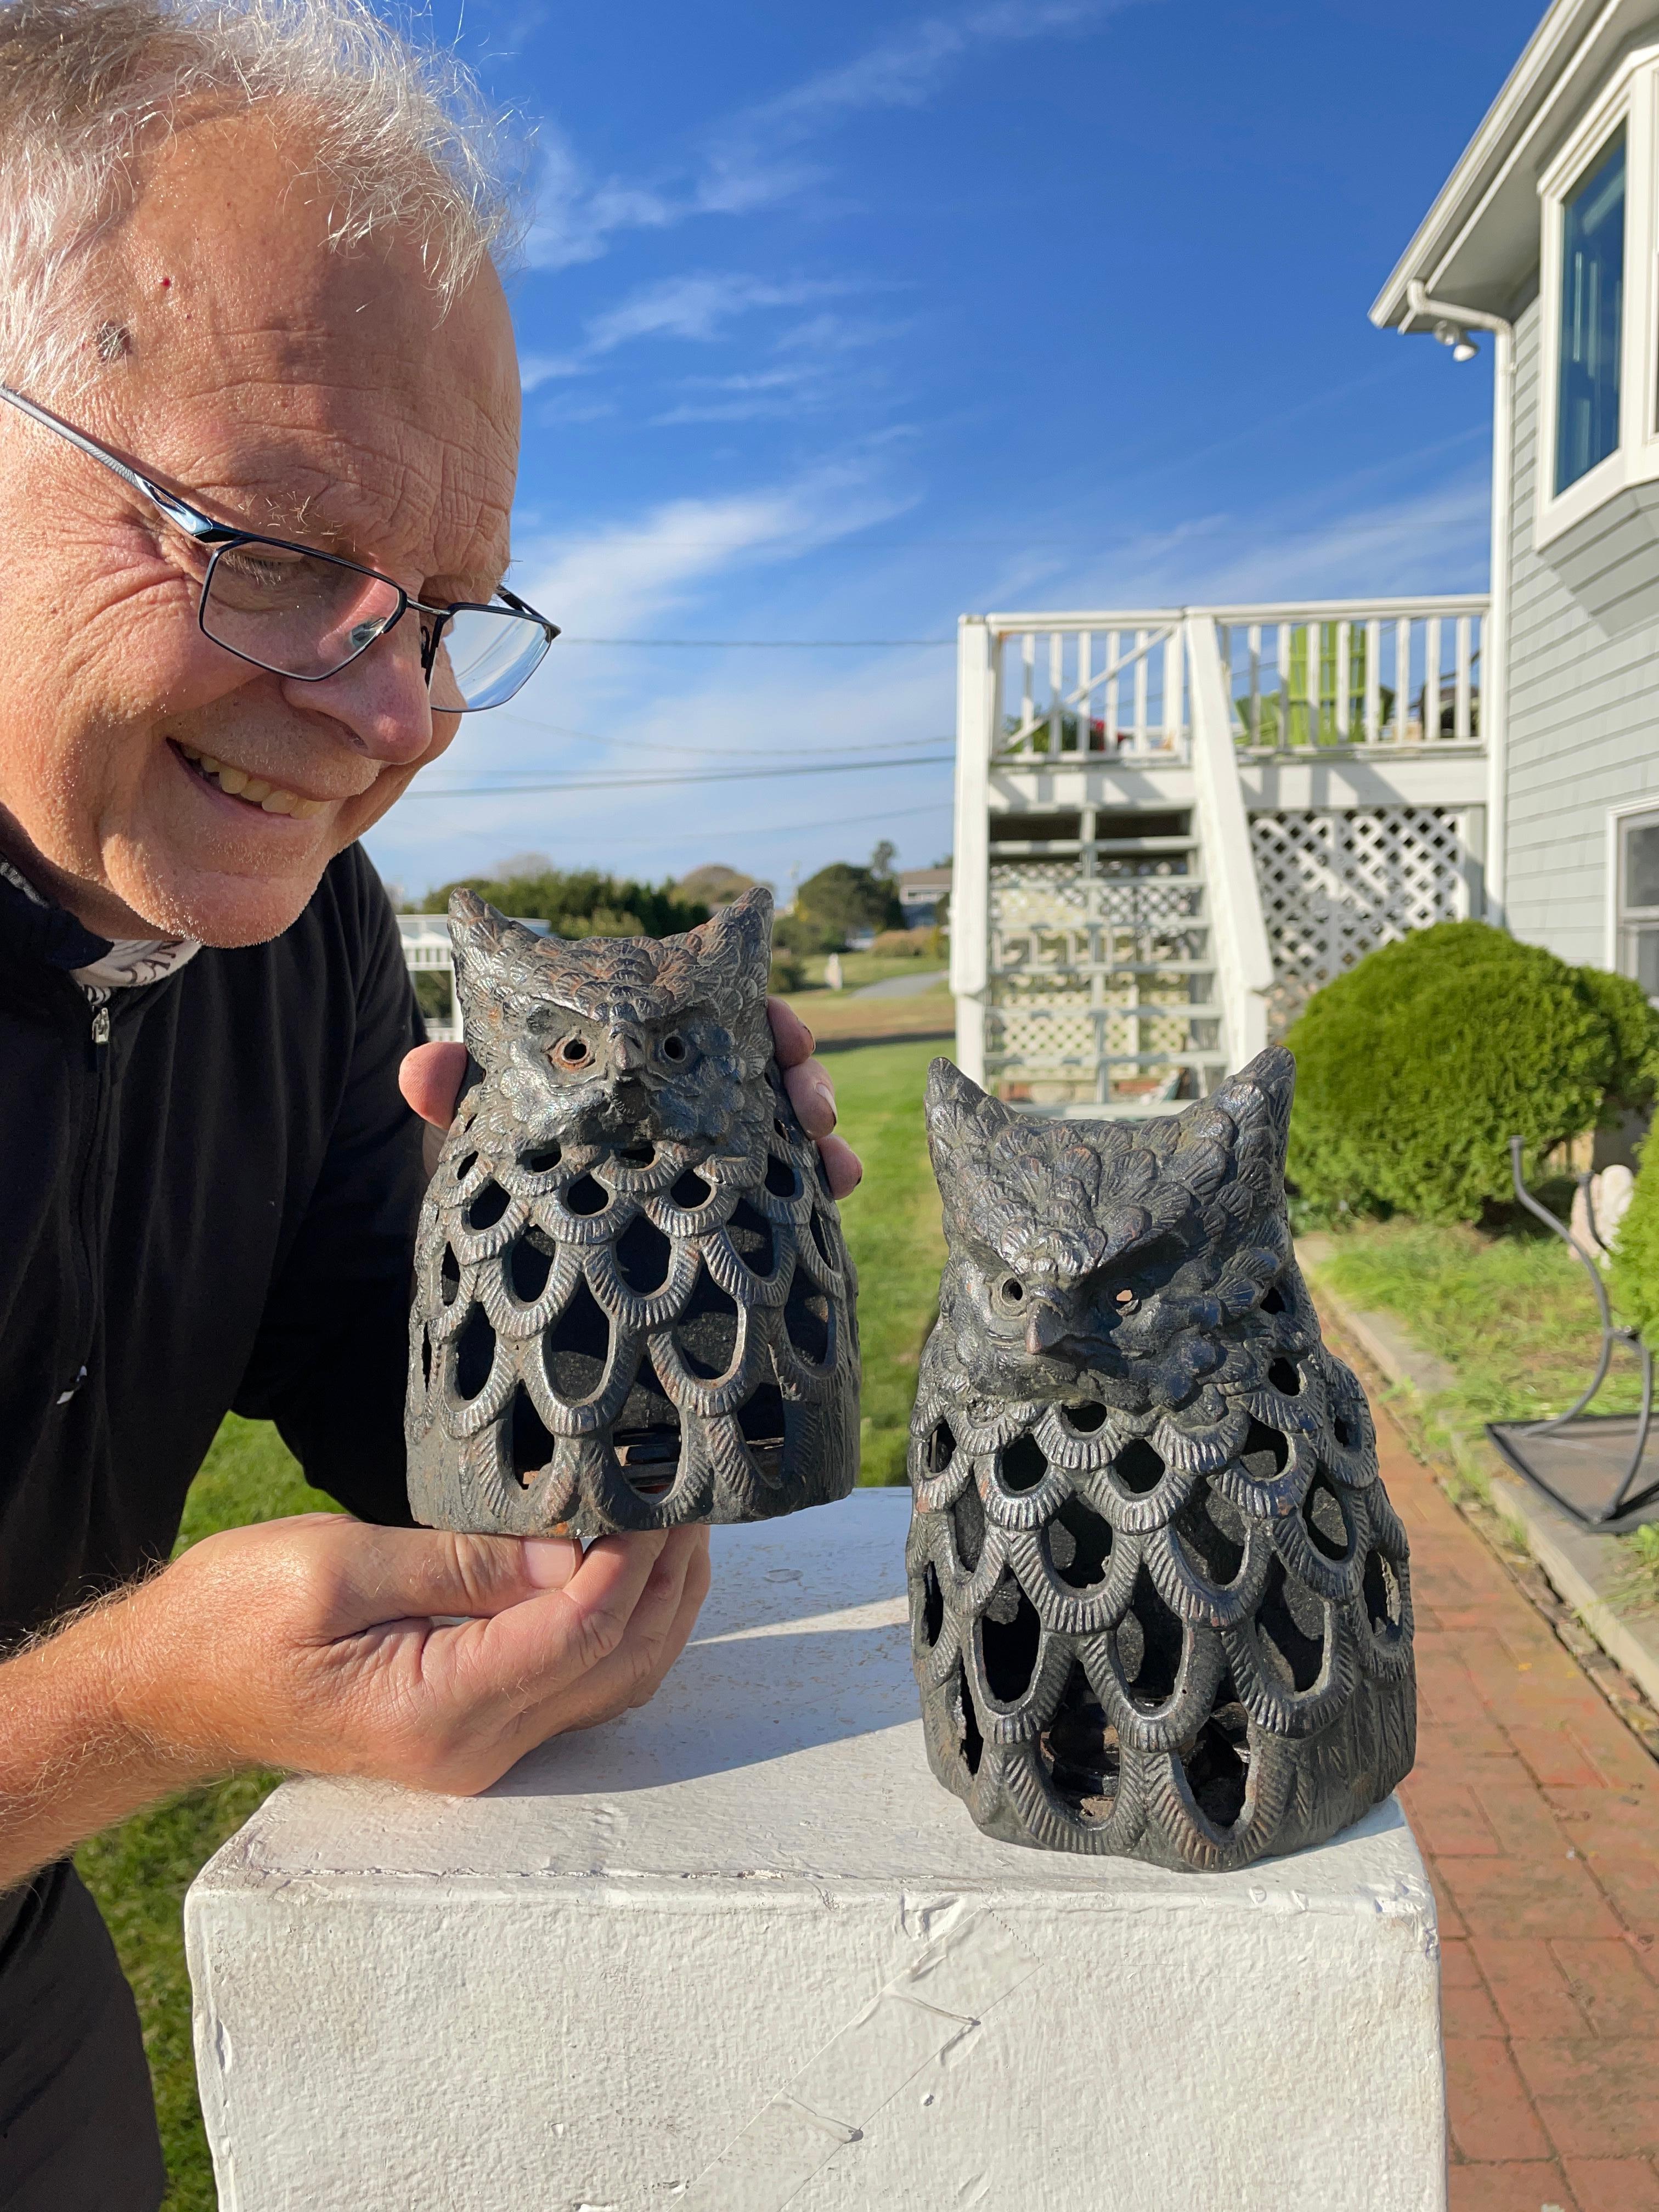 In Japan the owl enjoys a highly venerated status as a symbol of wisdom and fortune. 

This is the first pair (2) we have seen

Japan, an attractive and sturdy antique pair of iron wall lanterns with an 